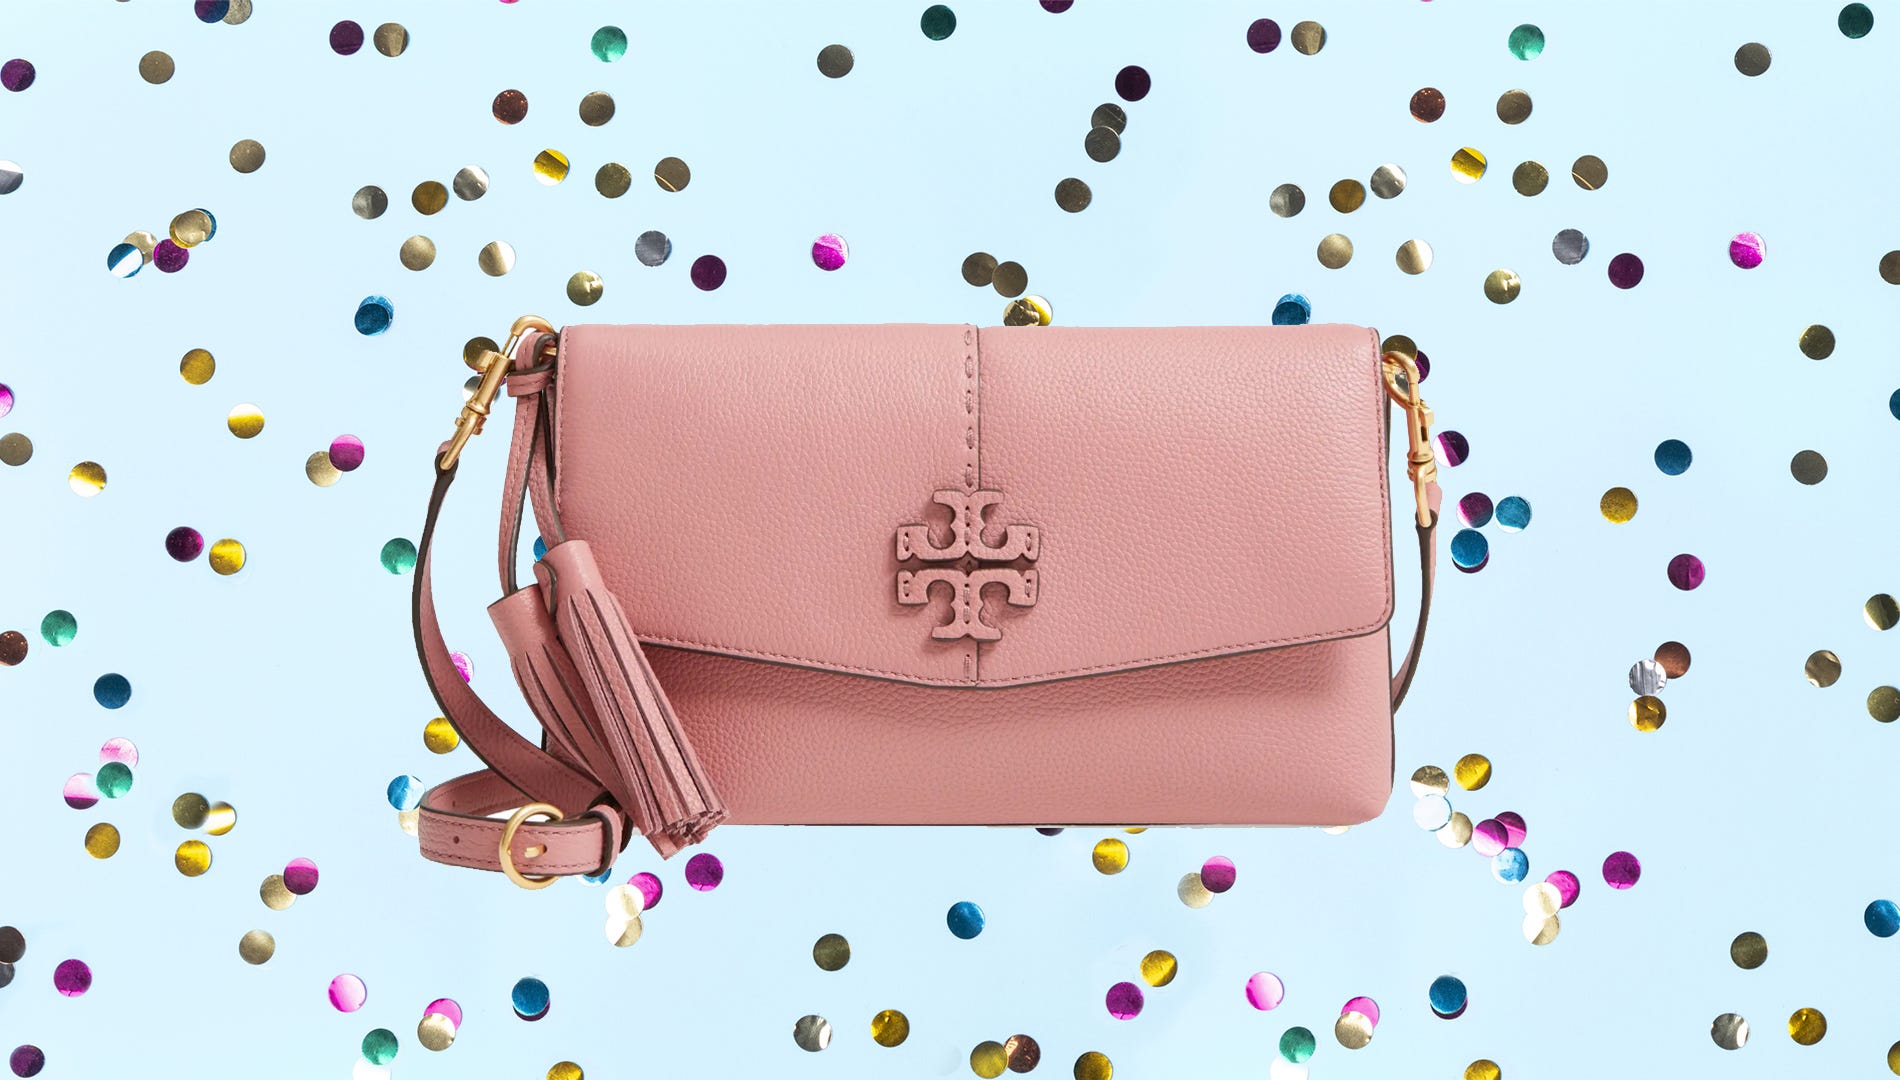 Experto sin Desanimarse Nordstrom Anniversary Sale 2021: Grab a Tory Burch purse on sale right now